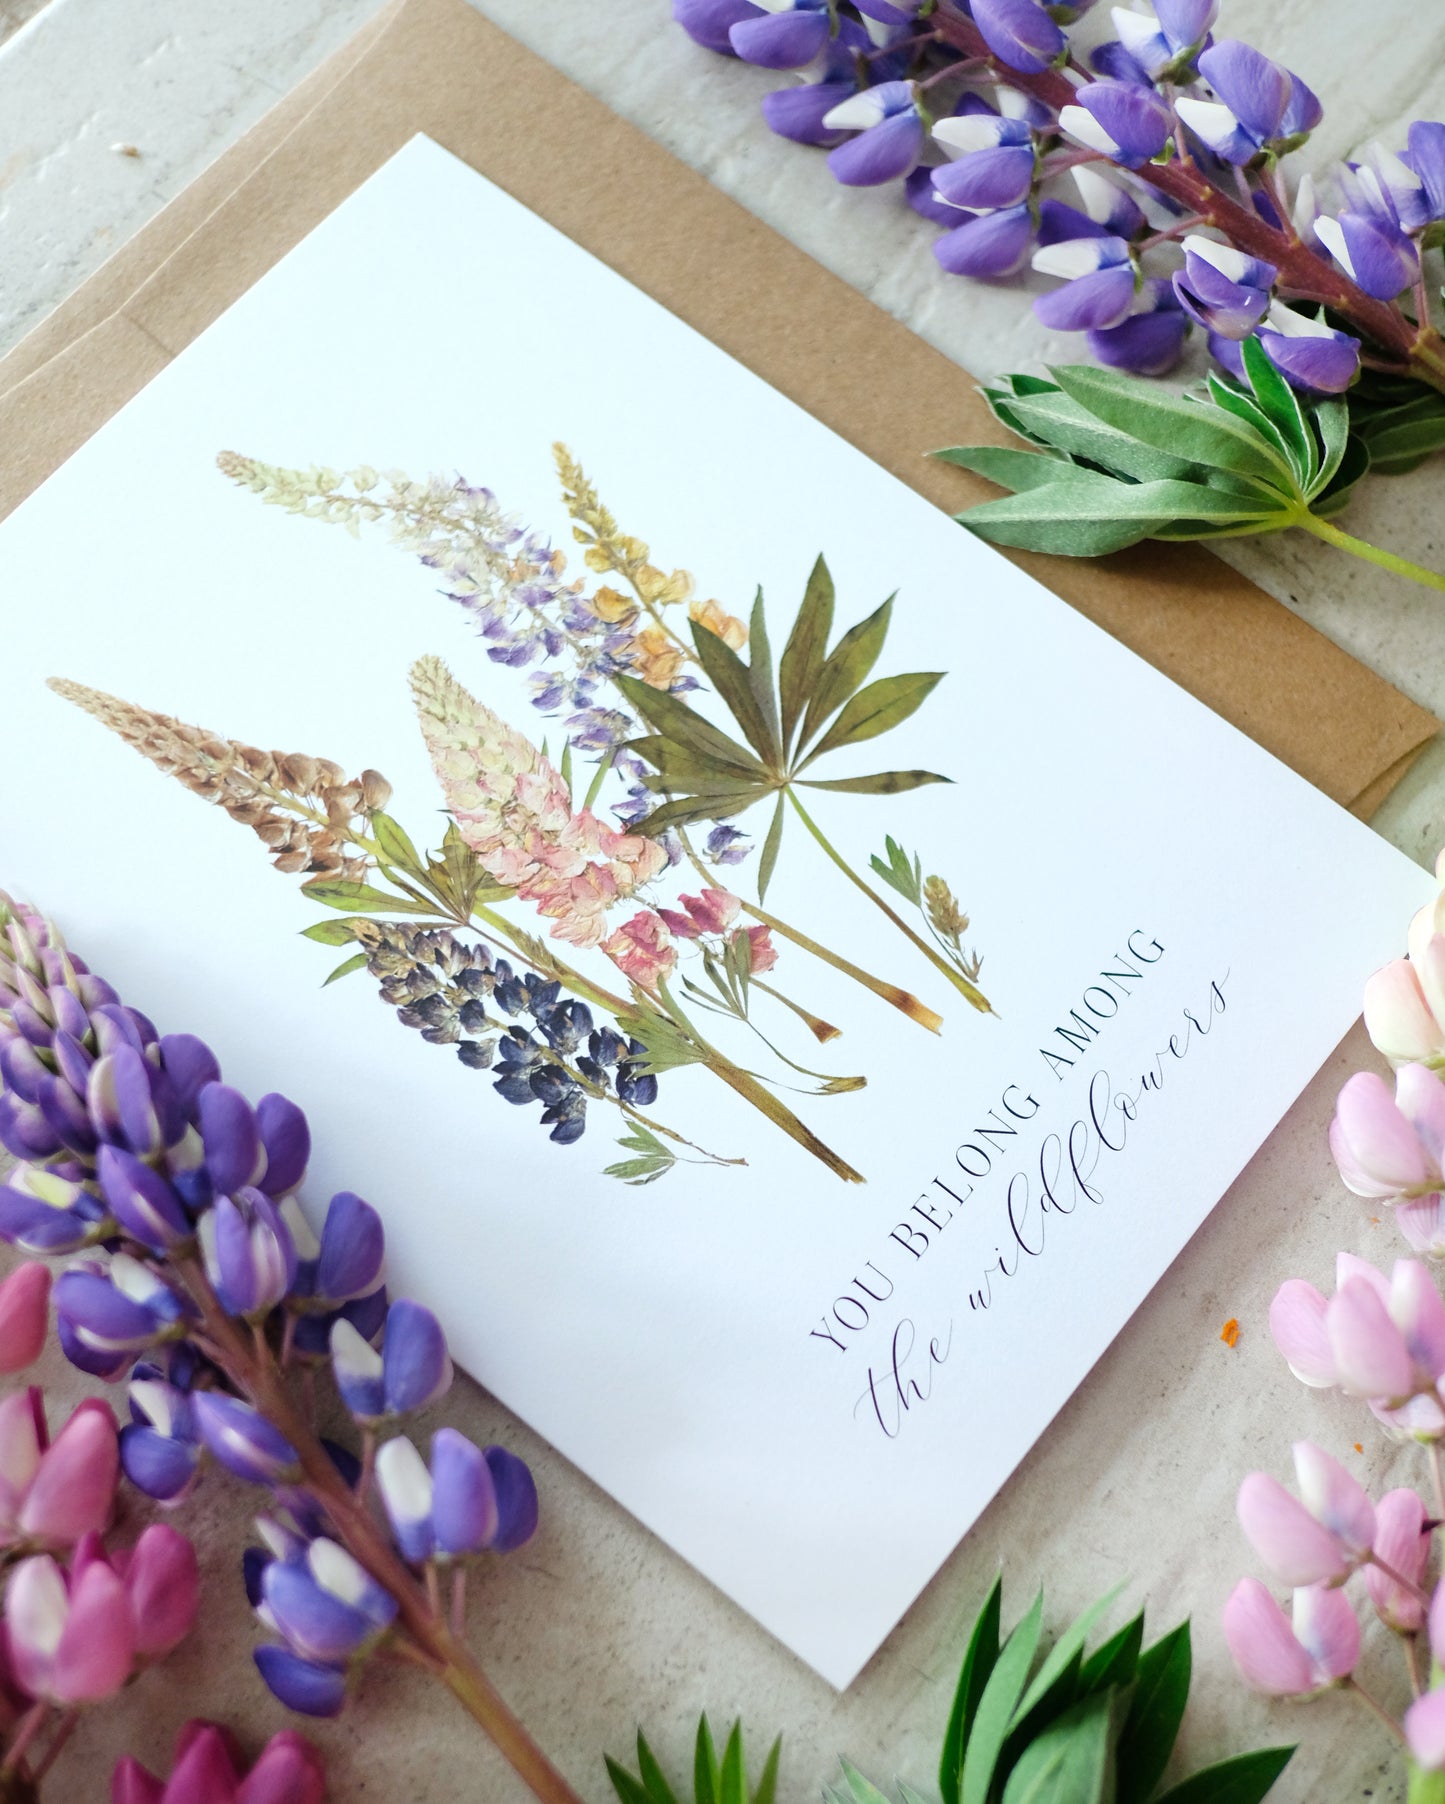 Wild Lupin, You Belong Among the Wildflowers, Pressed Flower Card